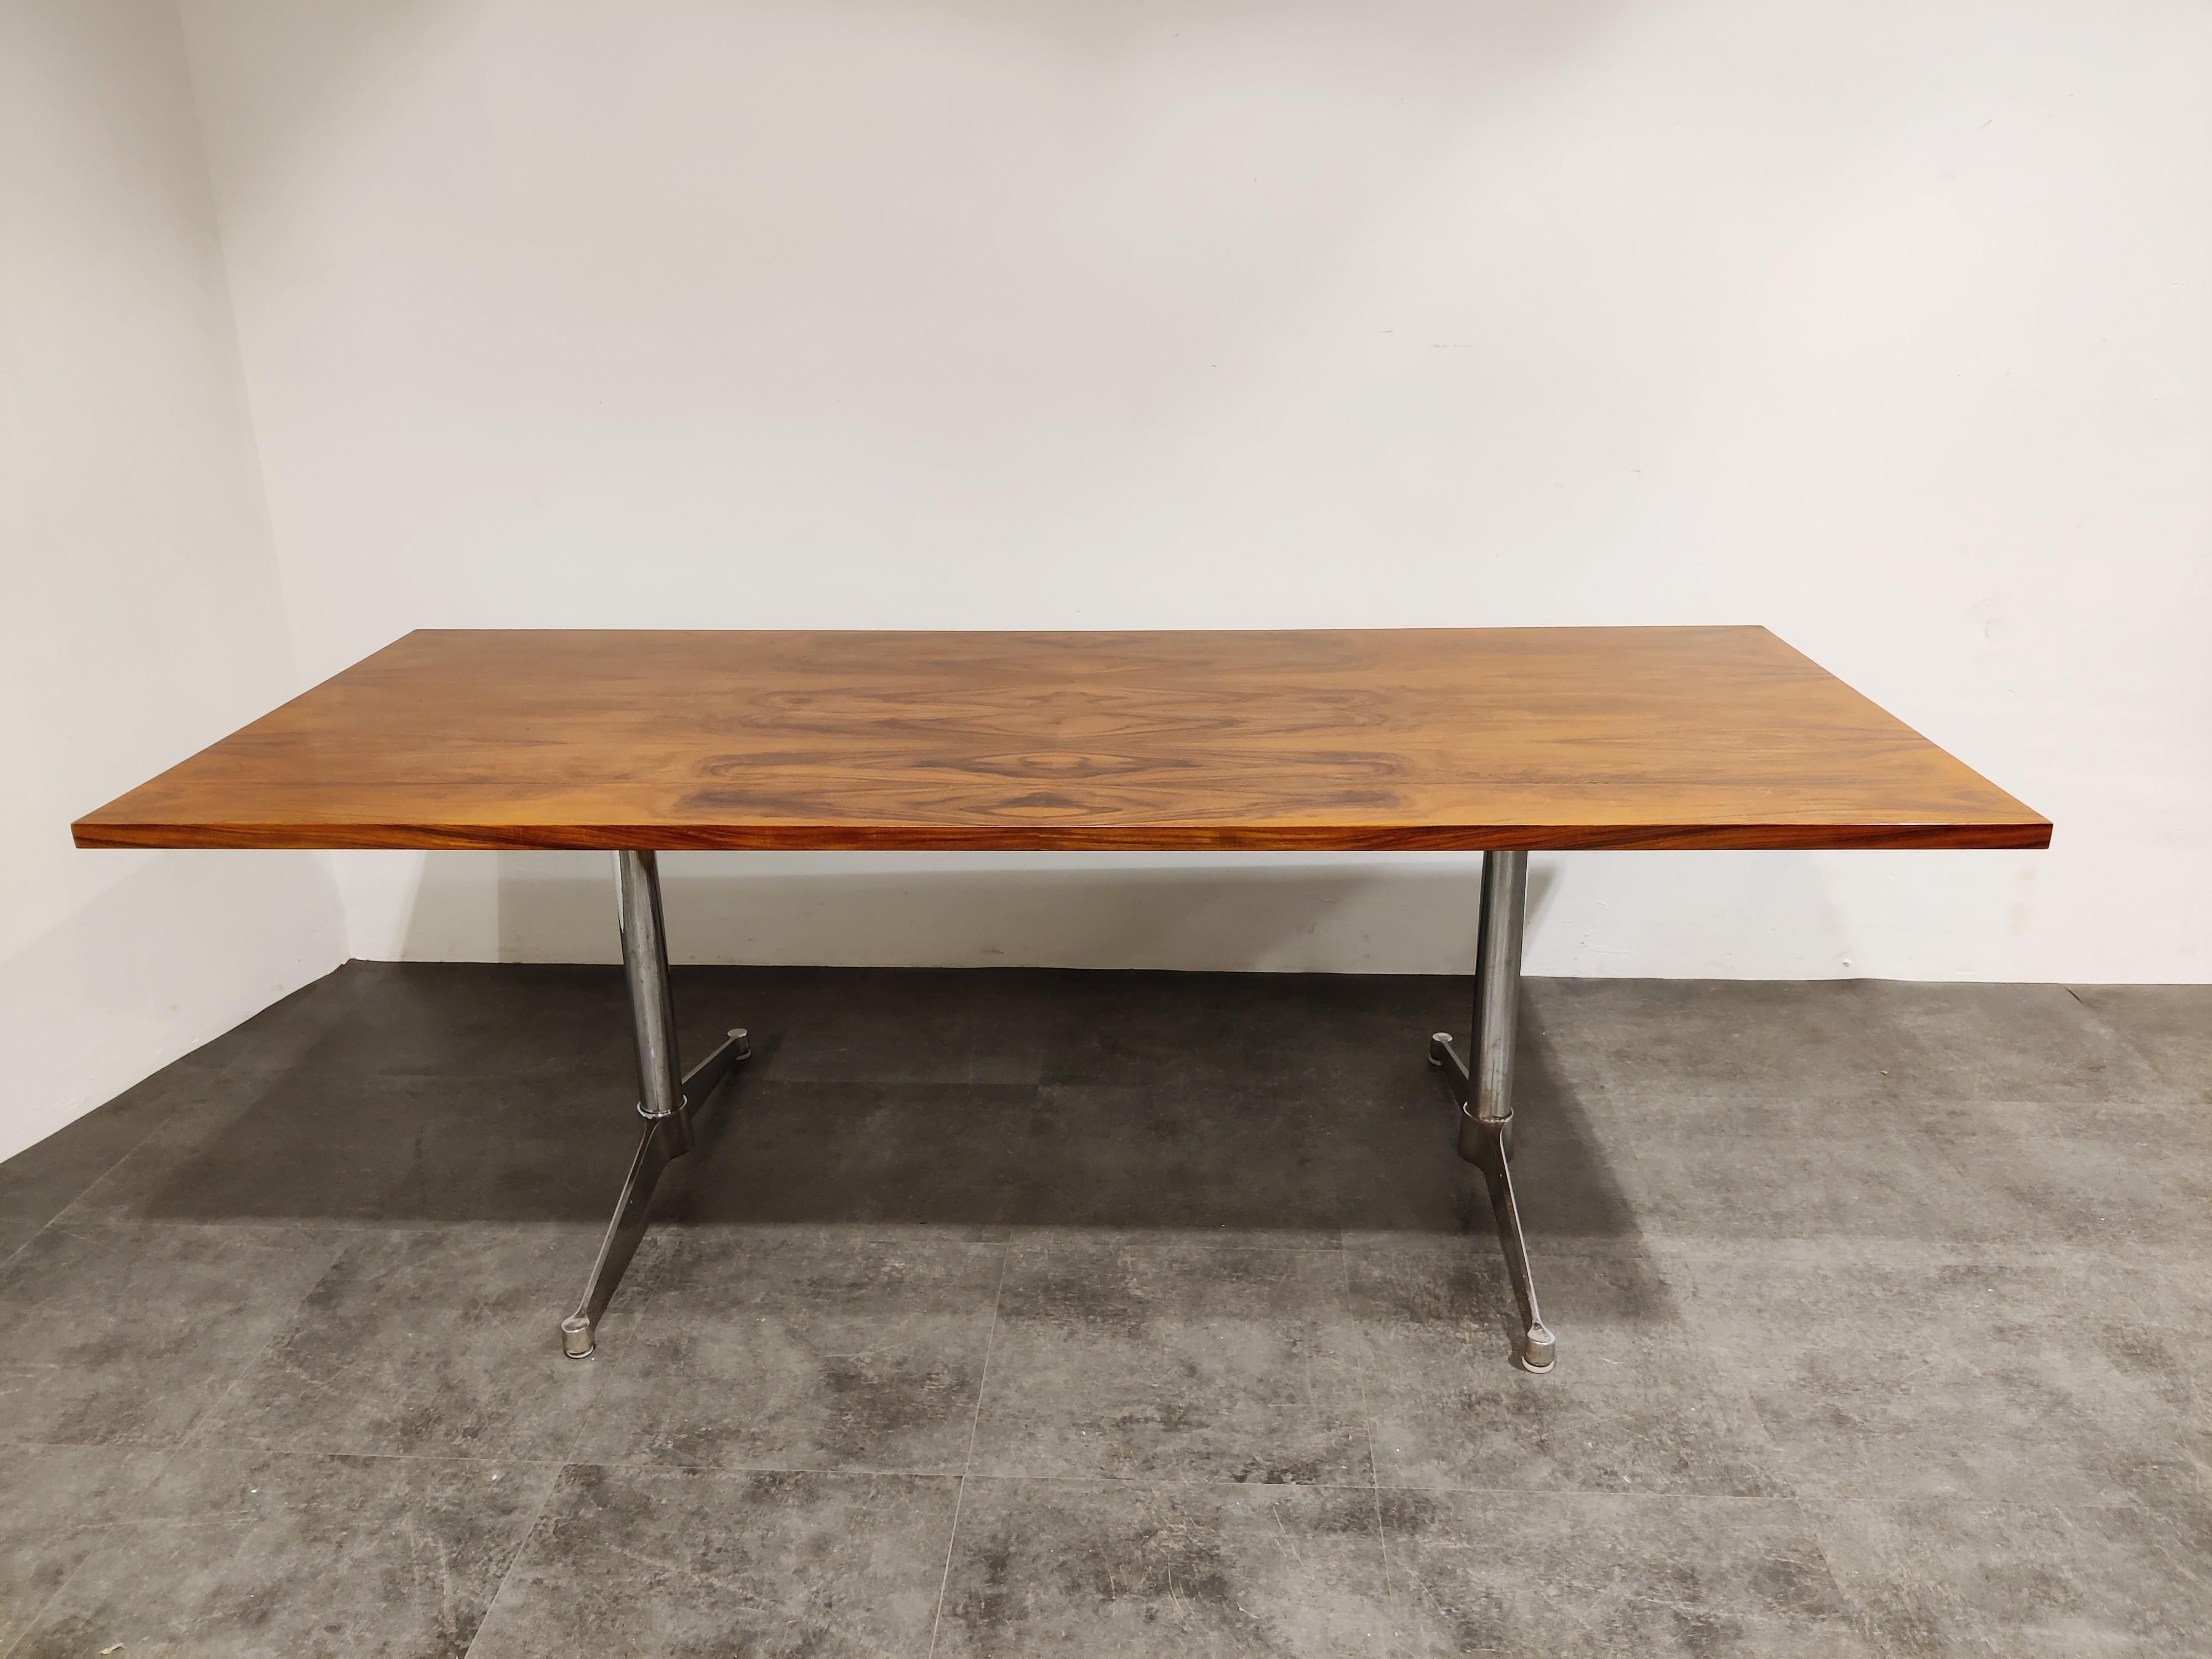 Vintage dining table, conference table or even desk table by Charles and Ray Eames for Herman Miller.

This table was added to the Herman Miller portfolio in 1961 but The manufacture of the series would only last for a few years and thus are quite